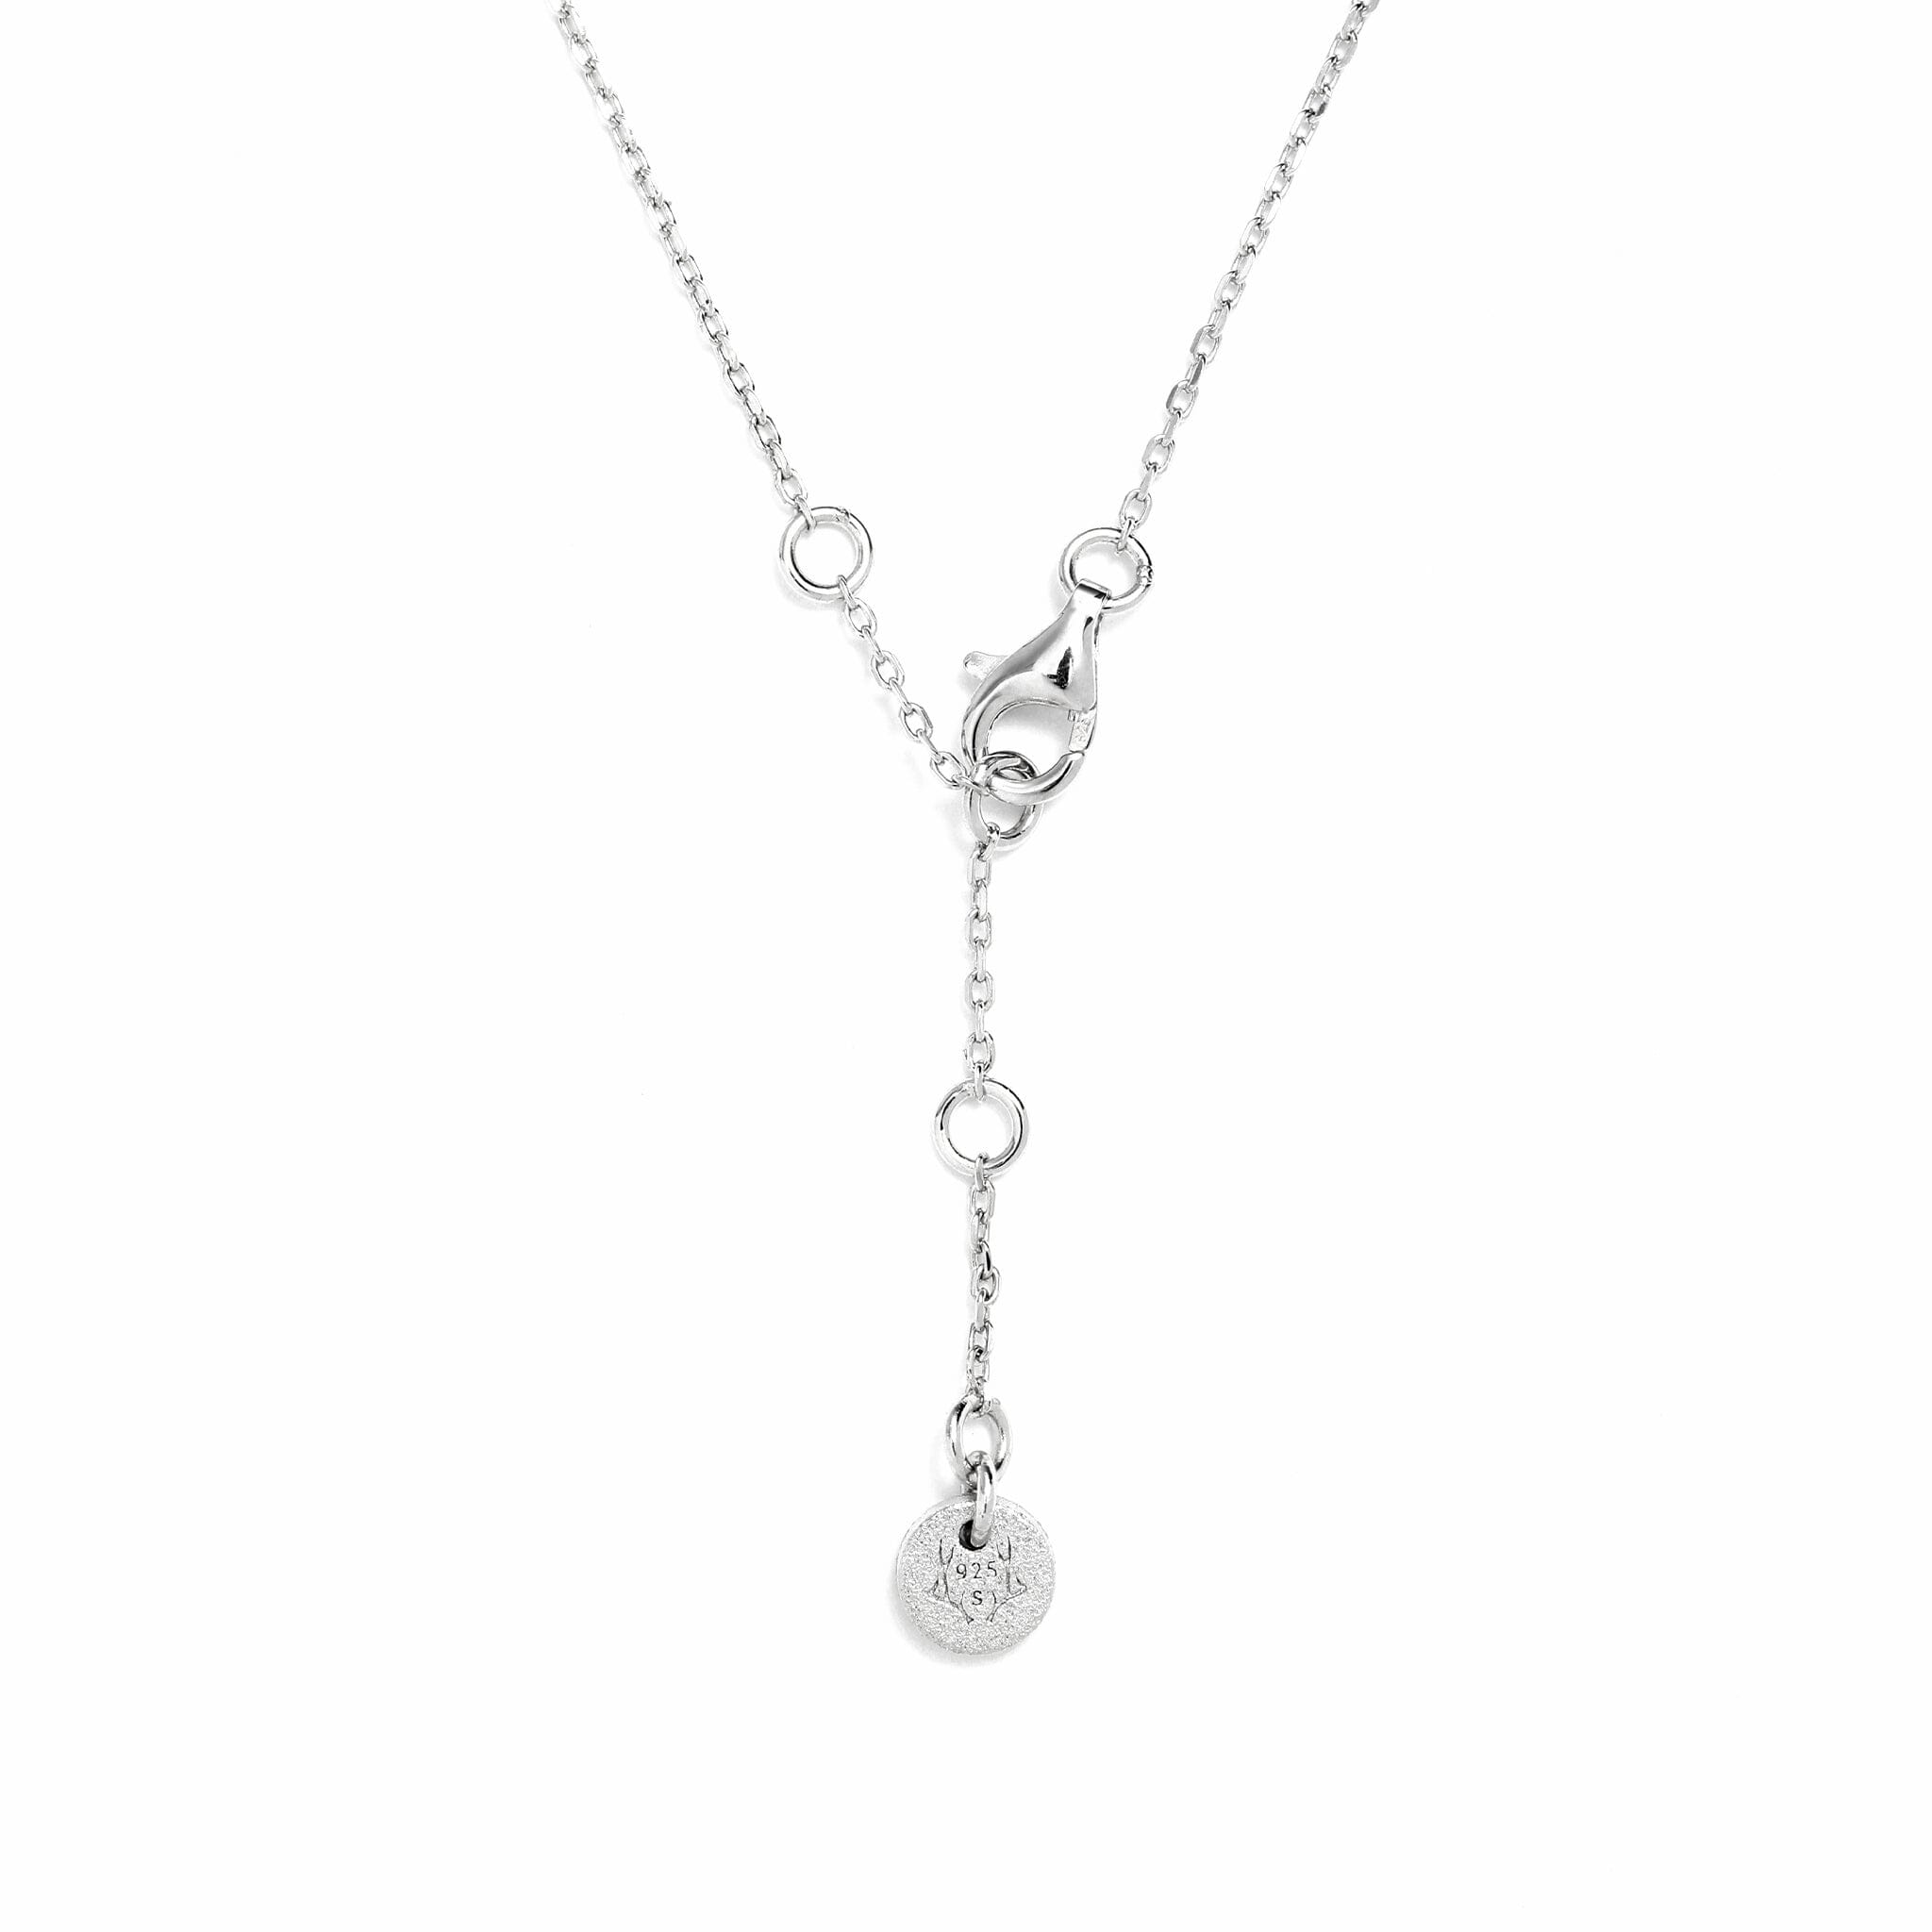 Women's Lunar Silver Necklace with Meteorite Necklaces WAA FASHION GROUP 